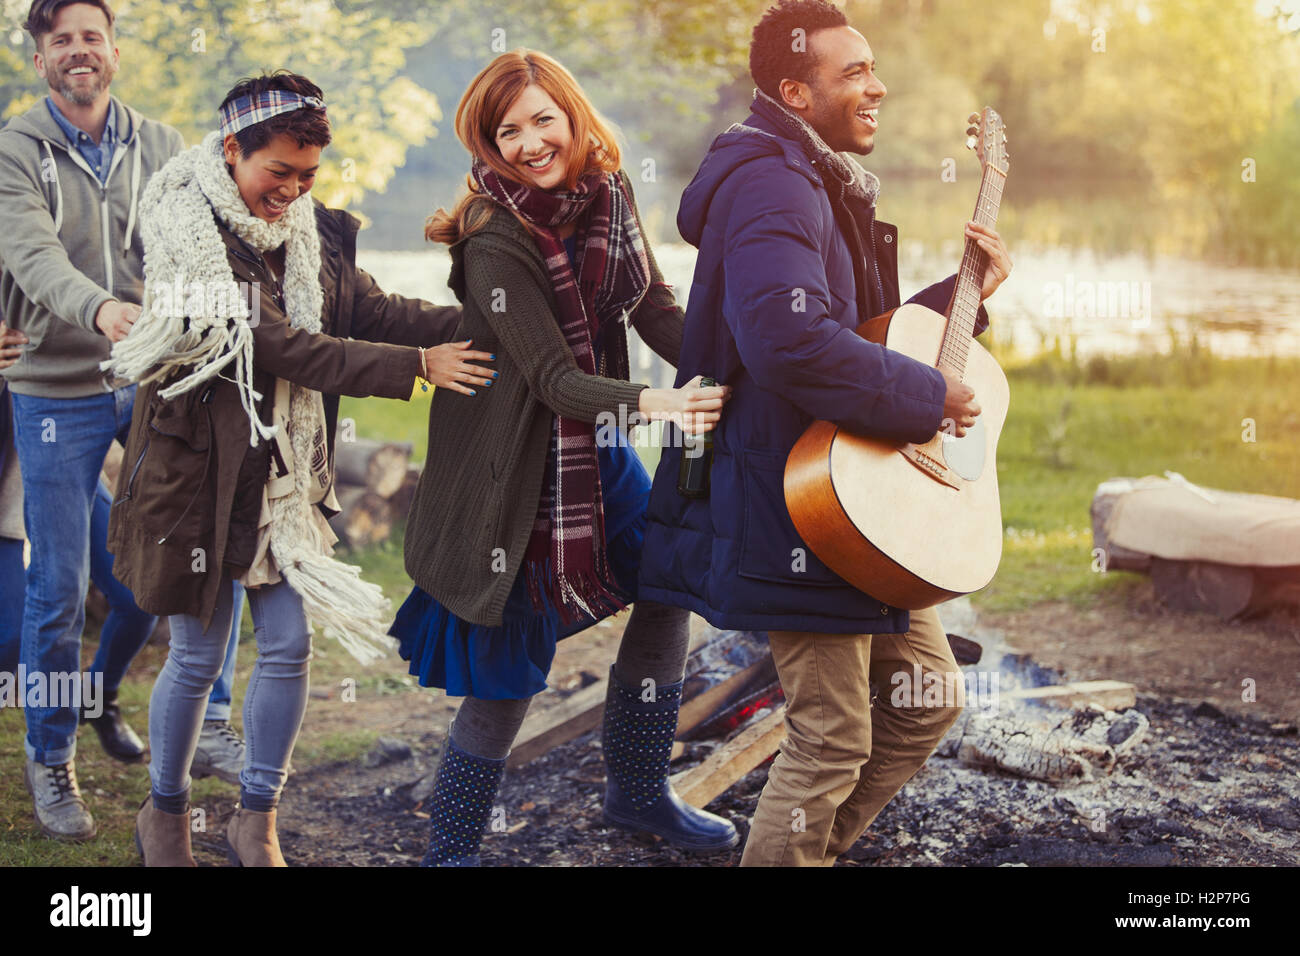 Playful friends with guitar dancing in conga line at campsite Stock Photo